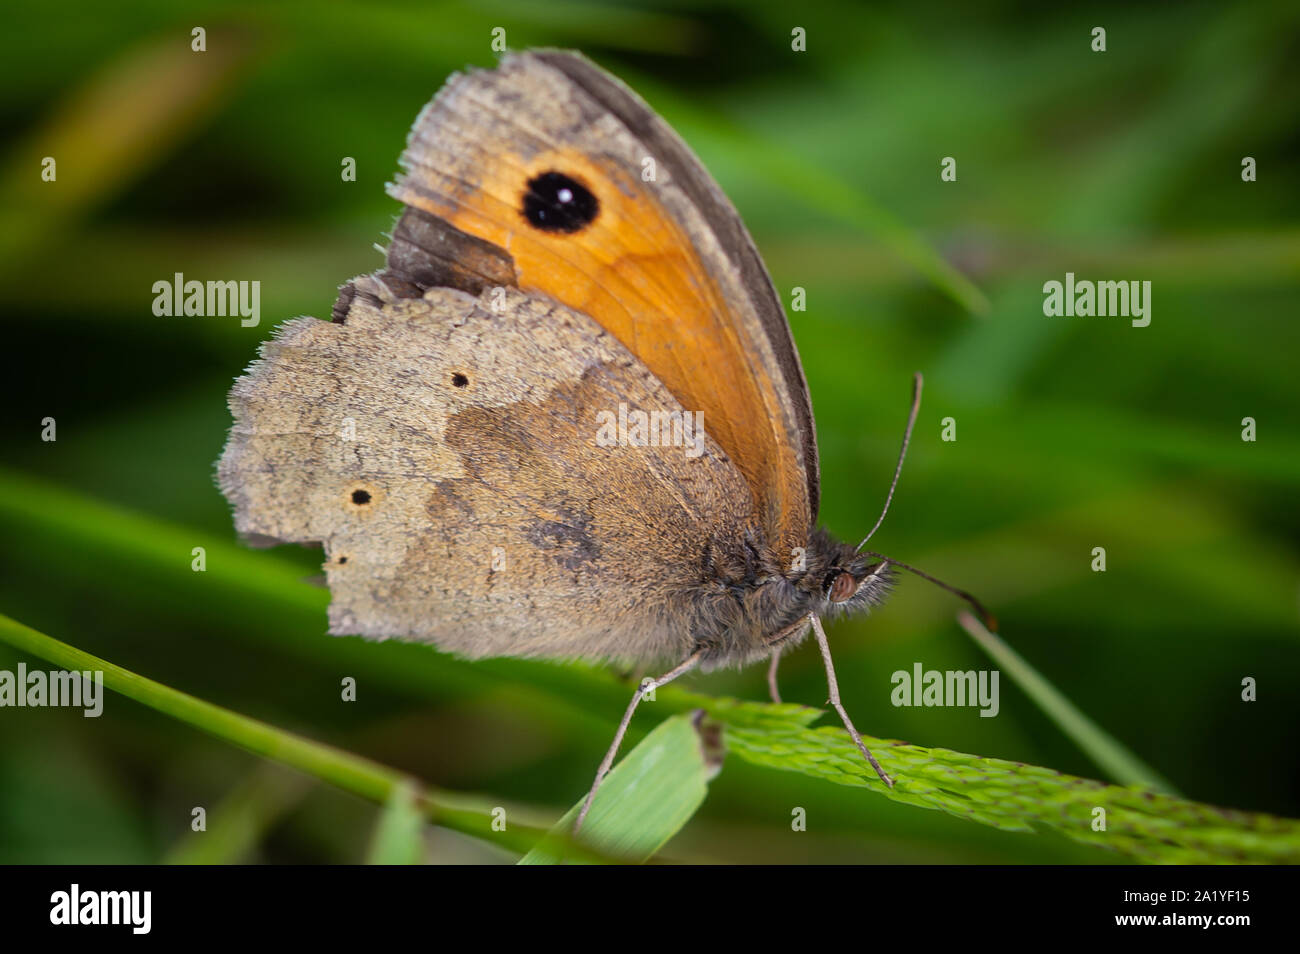 Meadow Brown butterfly in a tatty condition Stock Photo